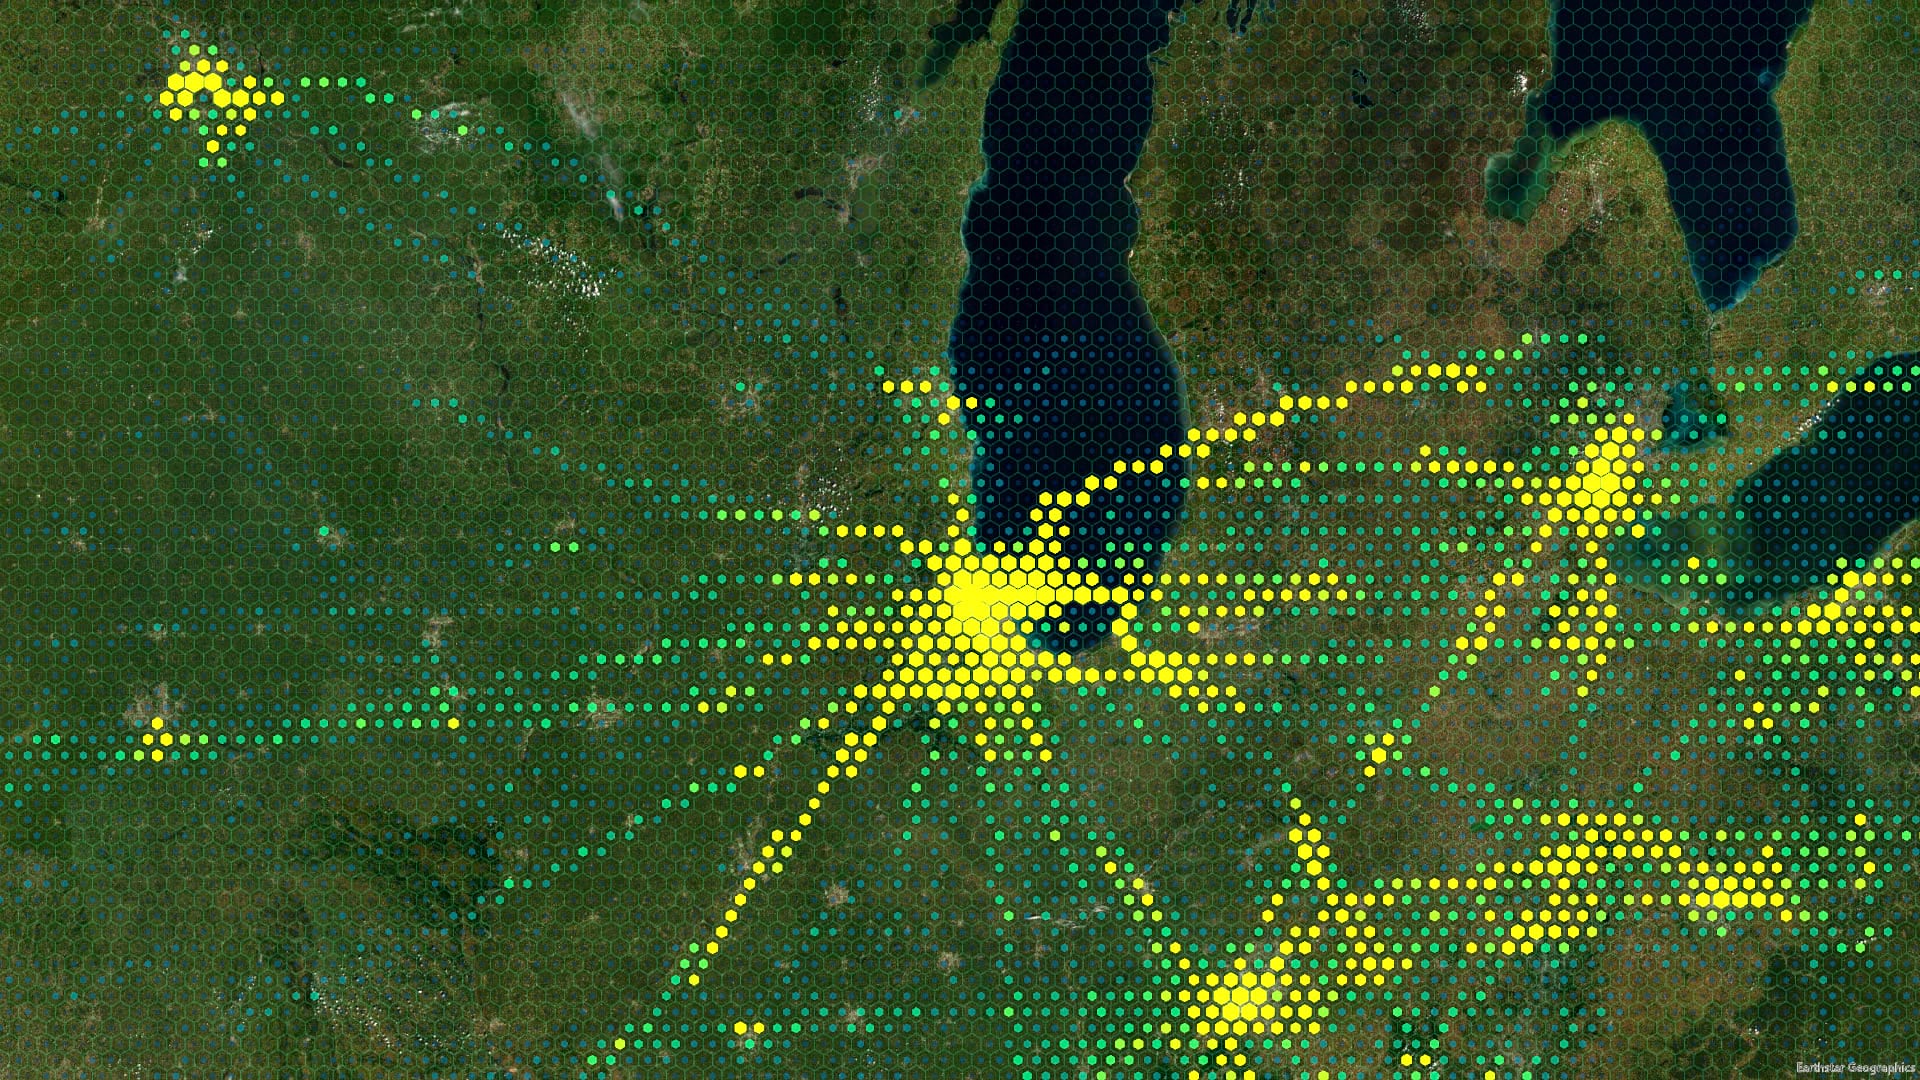 flights aggregated into hexagonal bins and given a size and color based on count